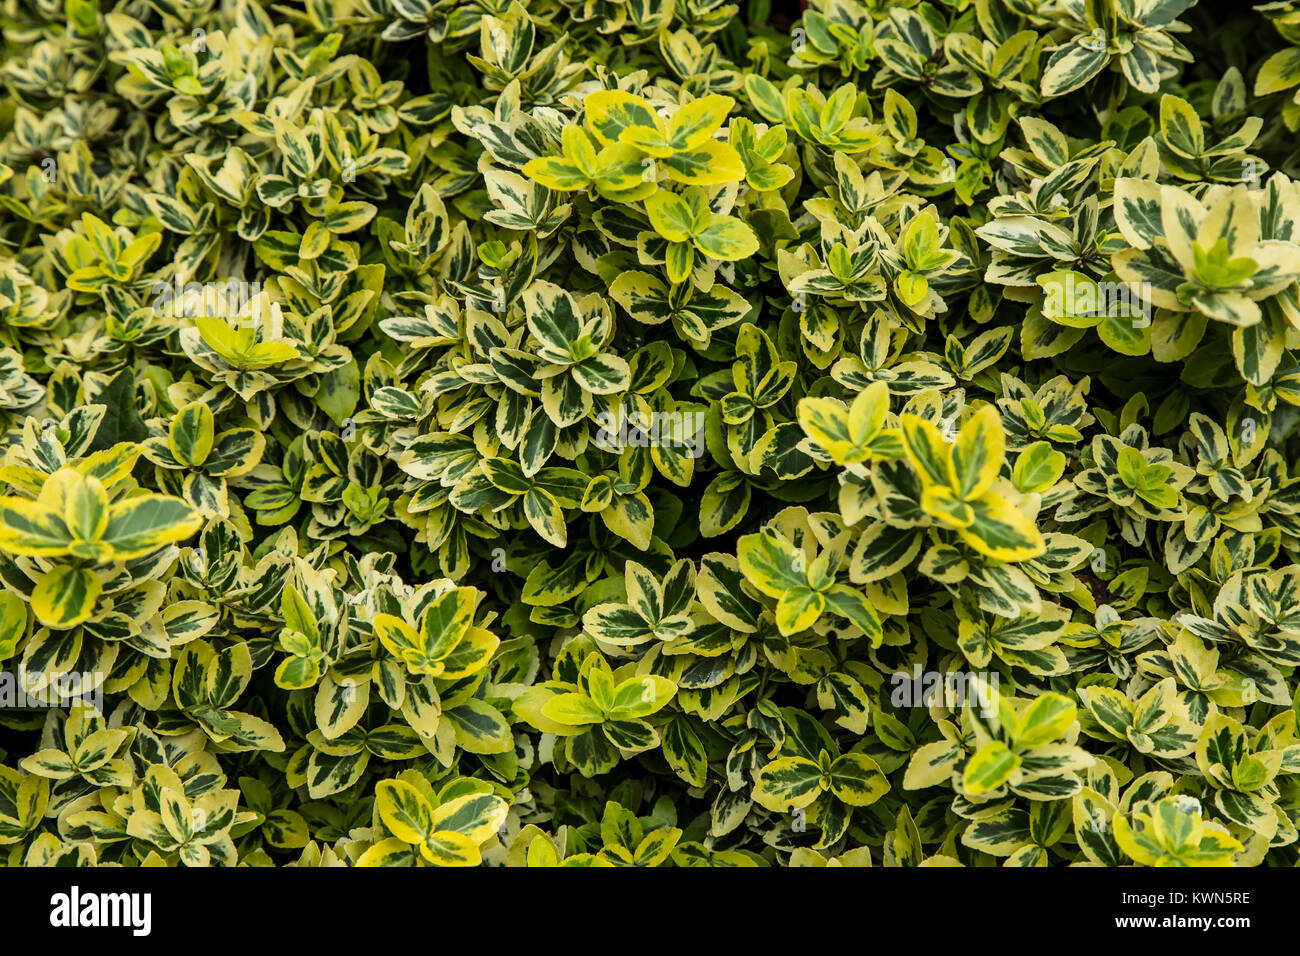 Euonymus Fortunei Emerald 'n' Gold close up. Stock Photo